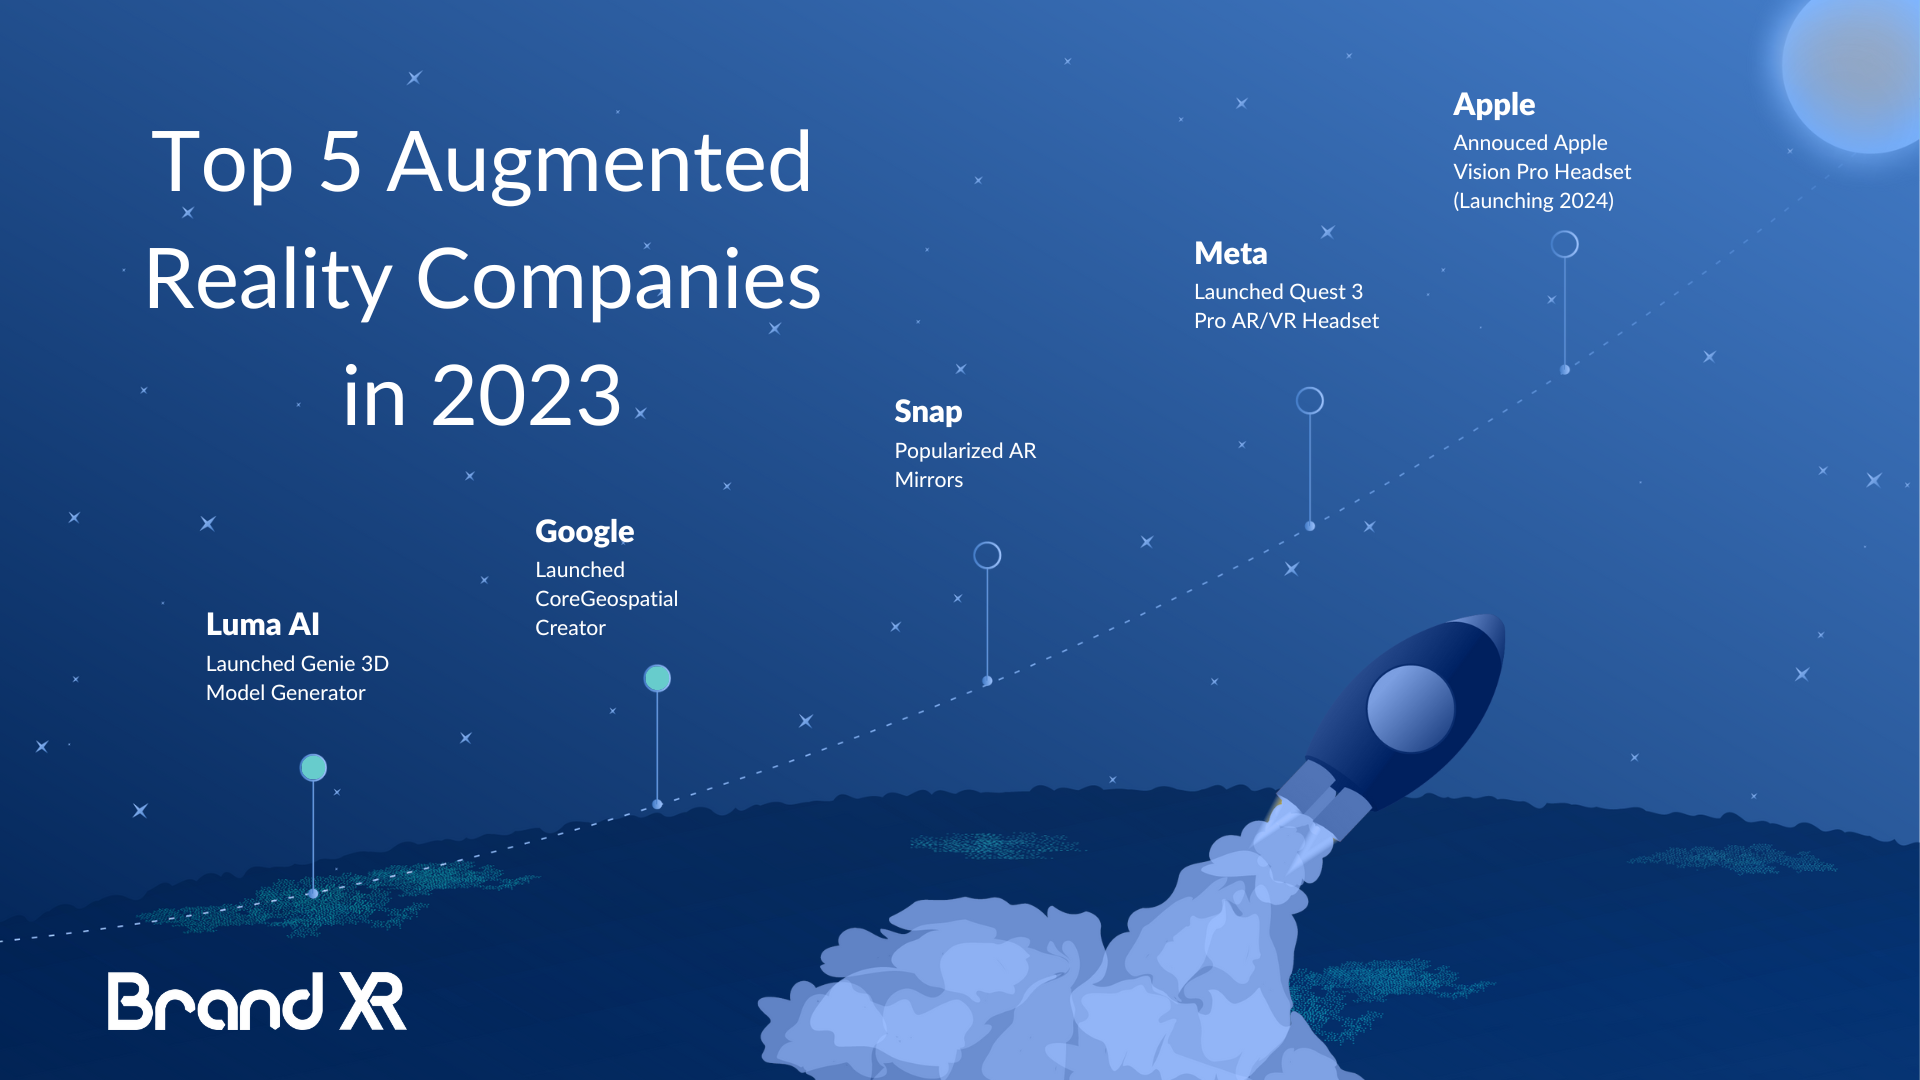 Top 5 Augmented Reality Companies in 2023 by BrandXR